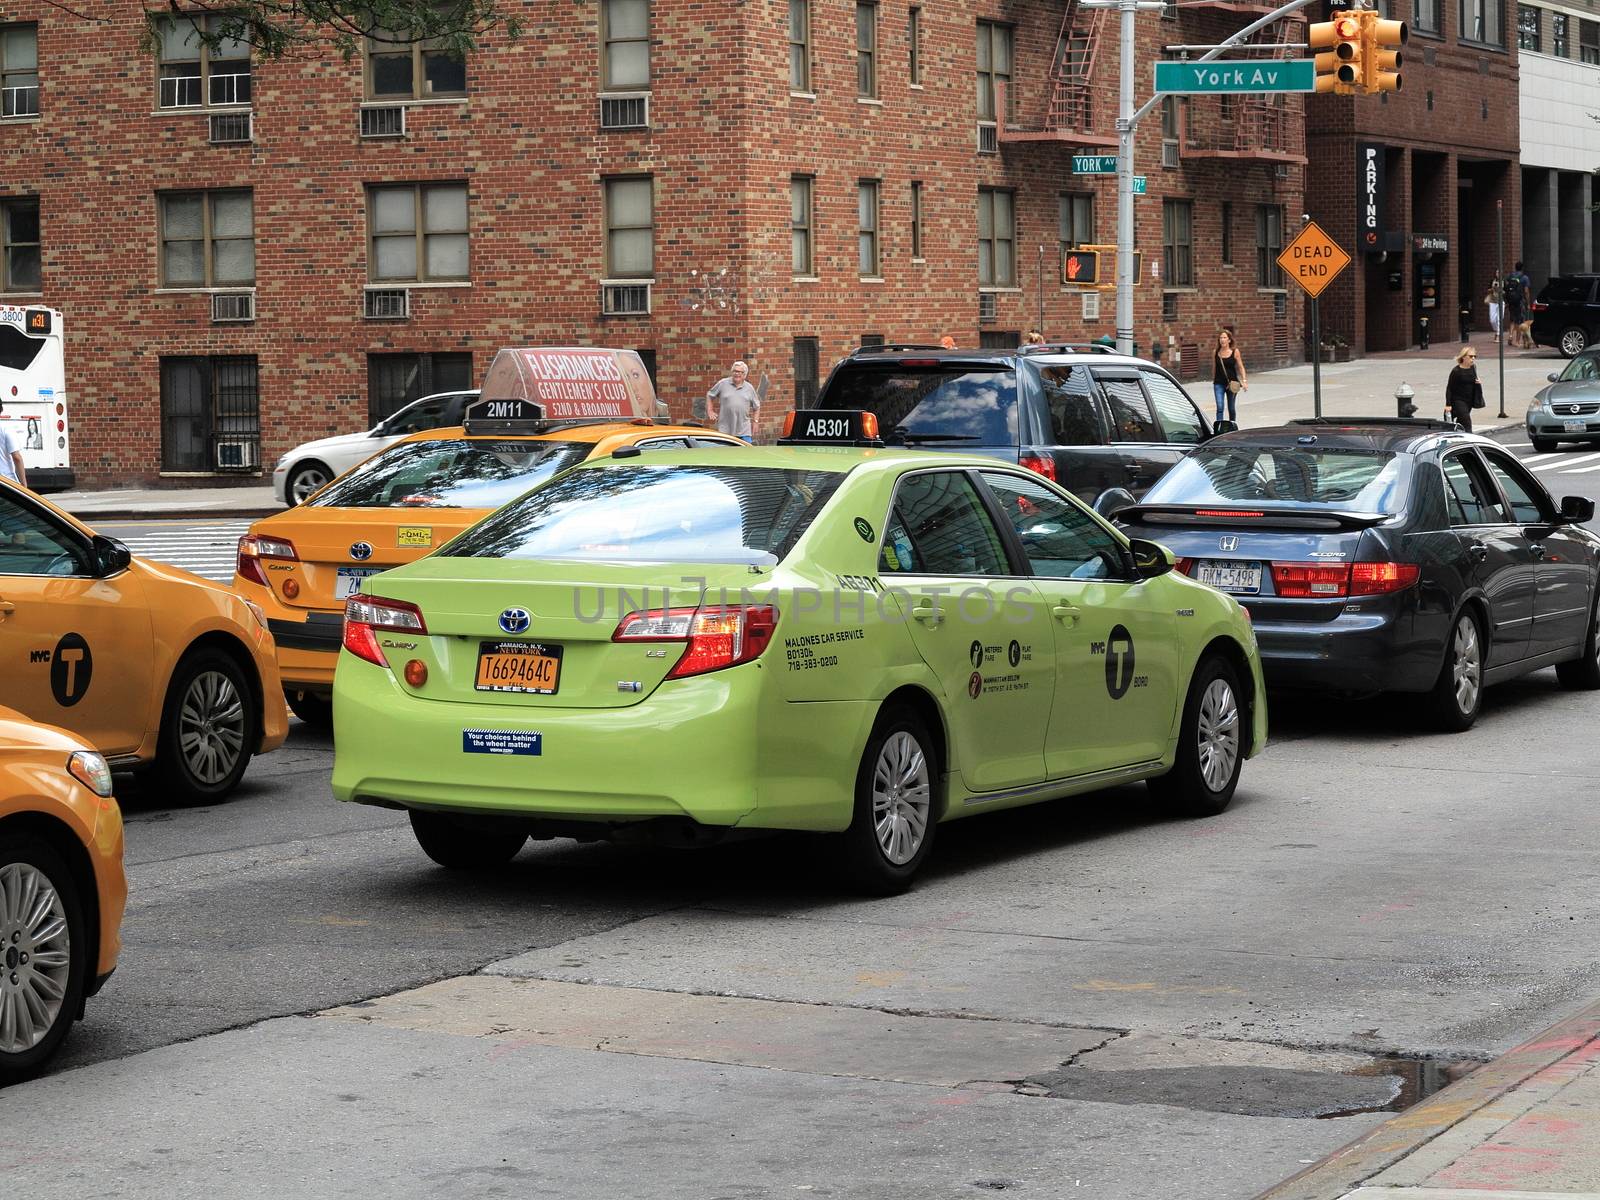 A special green "Boro Taxi" cab in New York City.